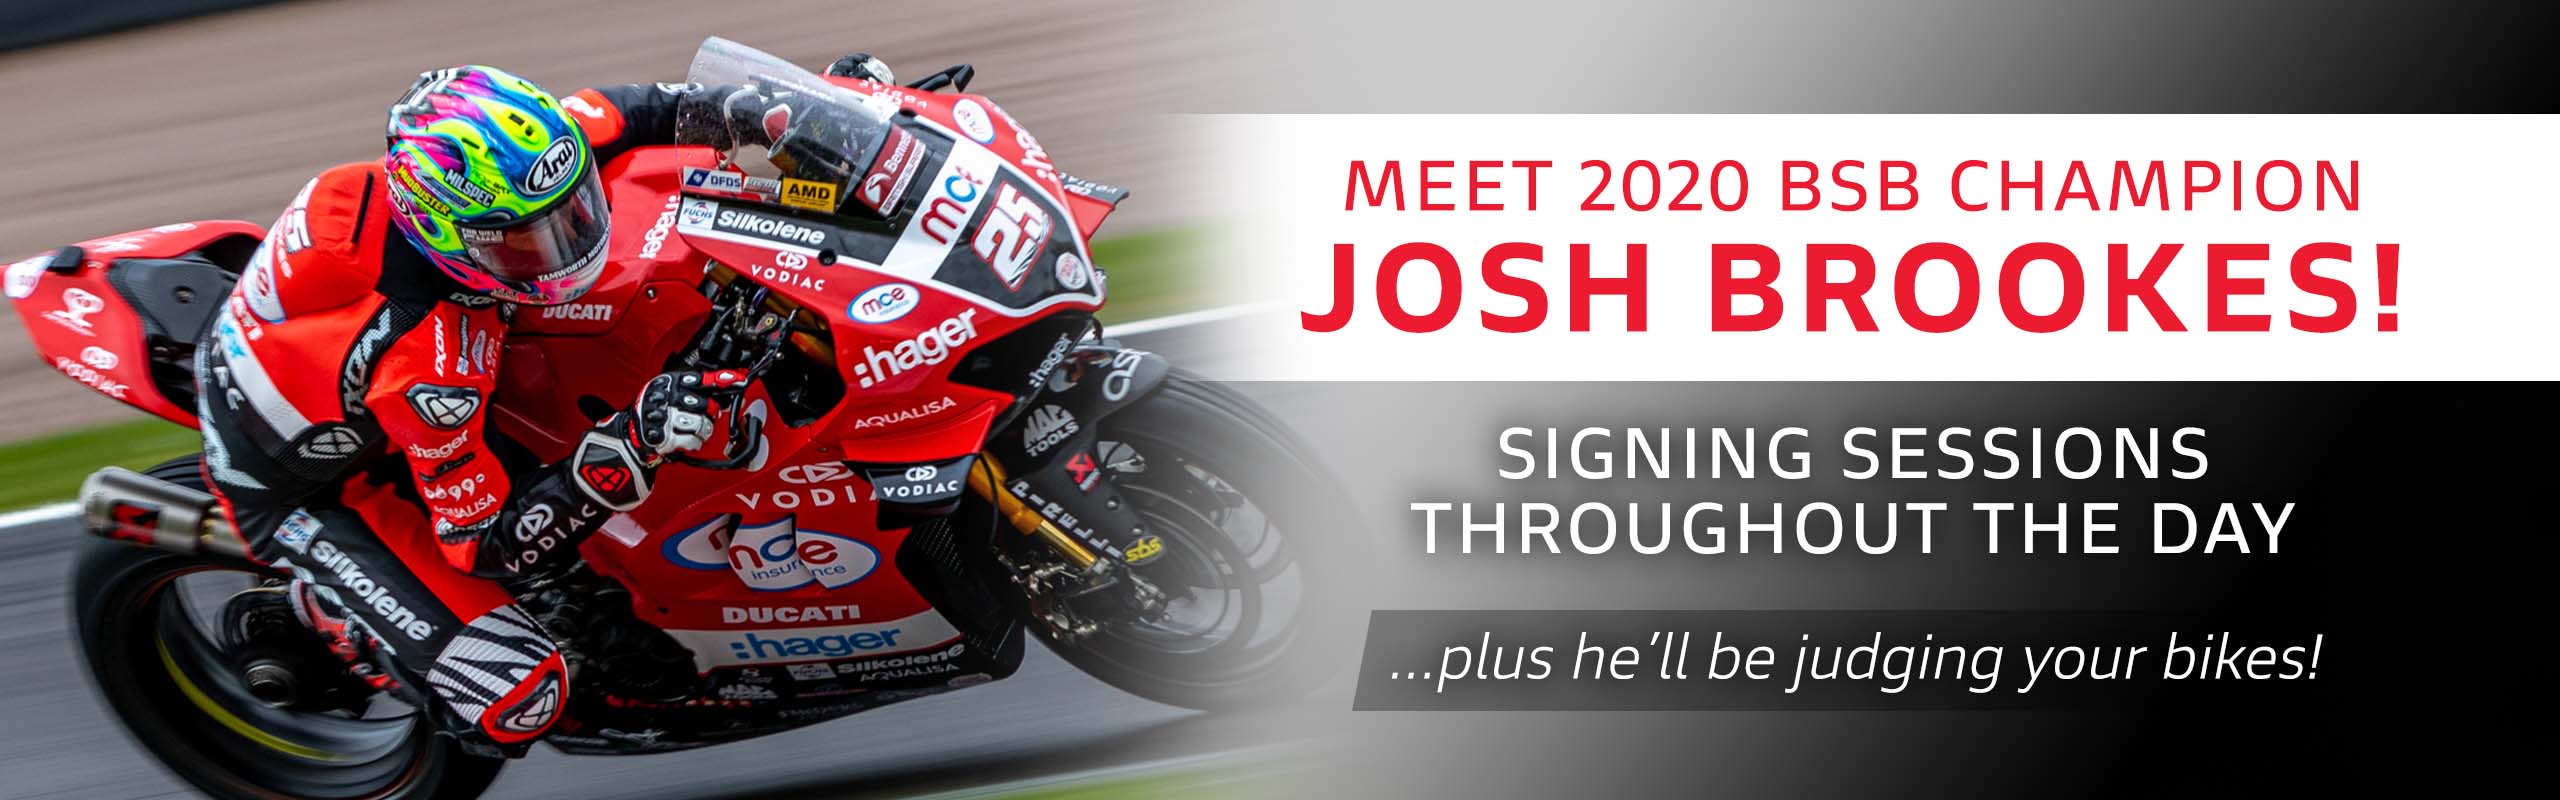 Join us at our Laguna Ducati Summer Celebration Event on Saturday 30th July and meet our extra special guest, Josh Brookes!